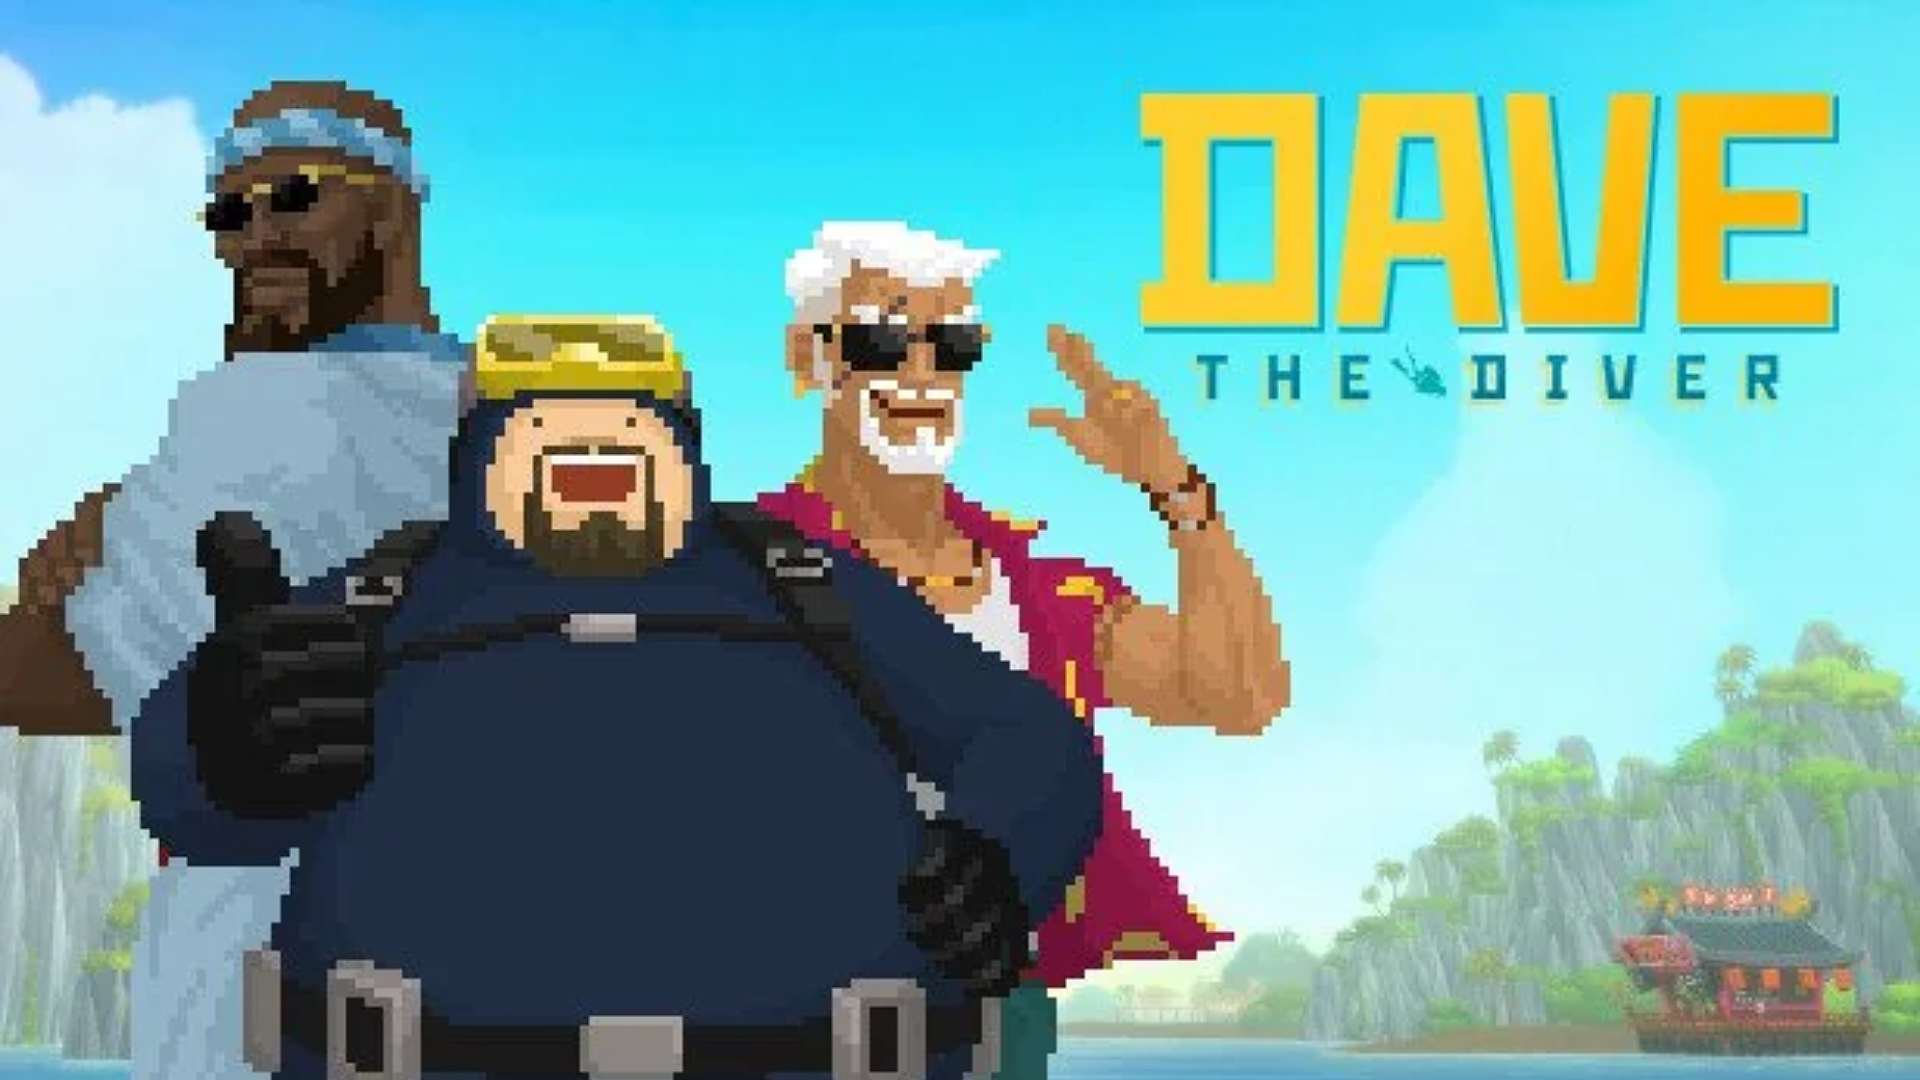 The Dave the Diver keyart